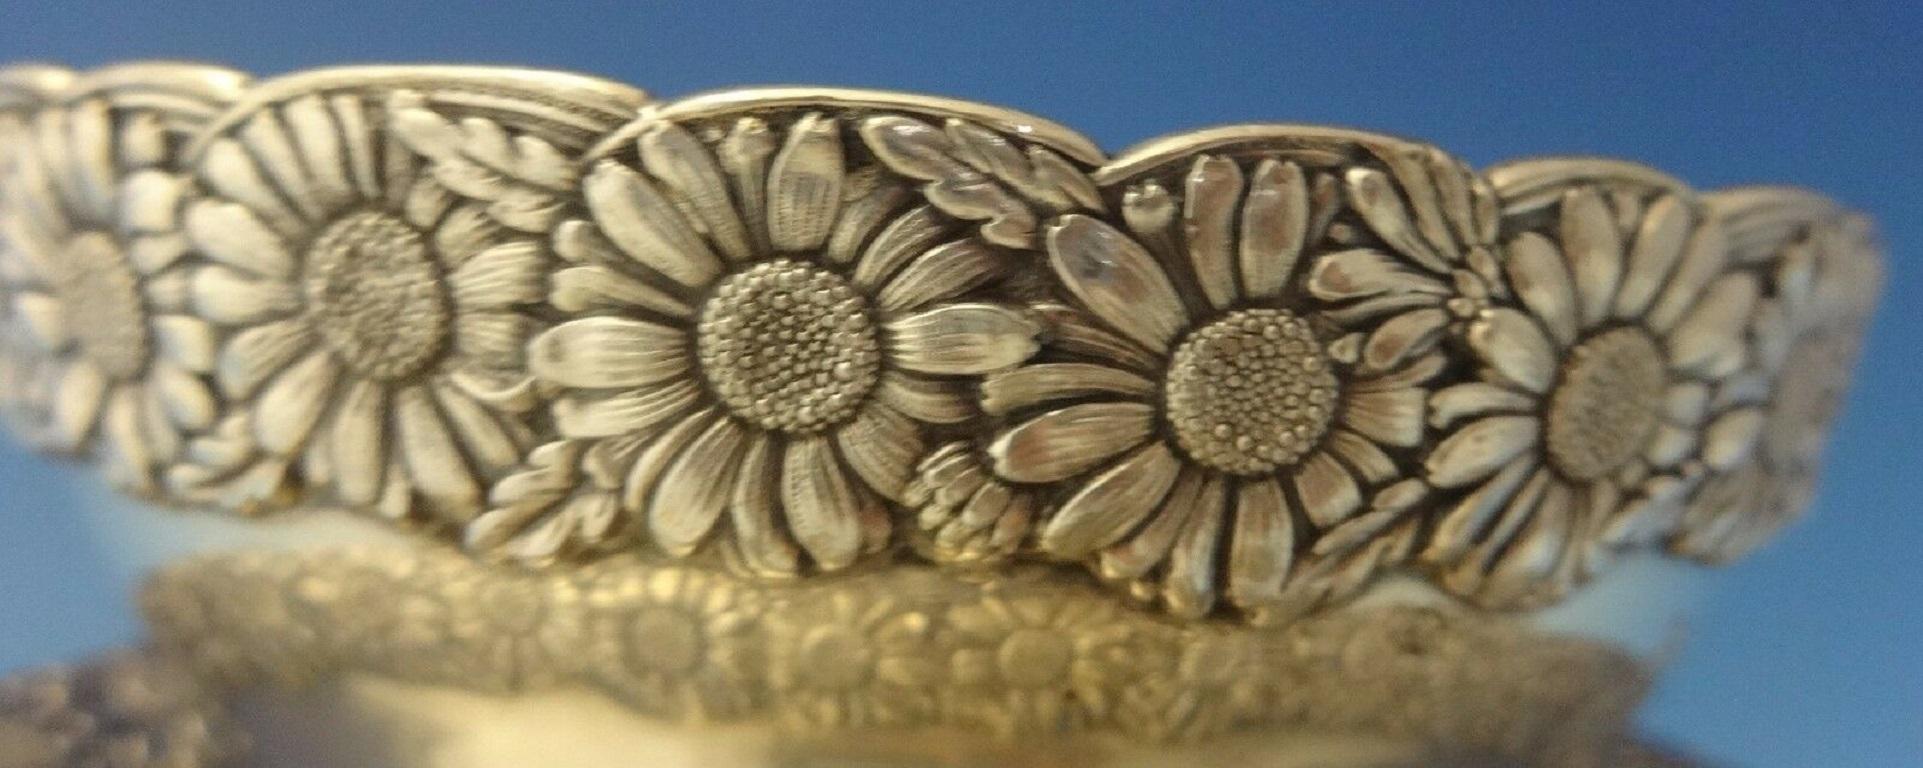 Vine by Tiffany & Co. This delightful Vine by Tiffany & Co. sterling dip dish and underplate in the daisy motif. Vintage elaborate monogram. The pieces are marked with a date letter M for 1873-1891 and #8174/2590. The bowl measures 2 tall, 4 1/2